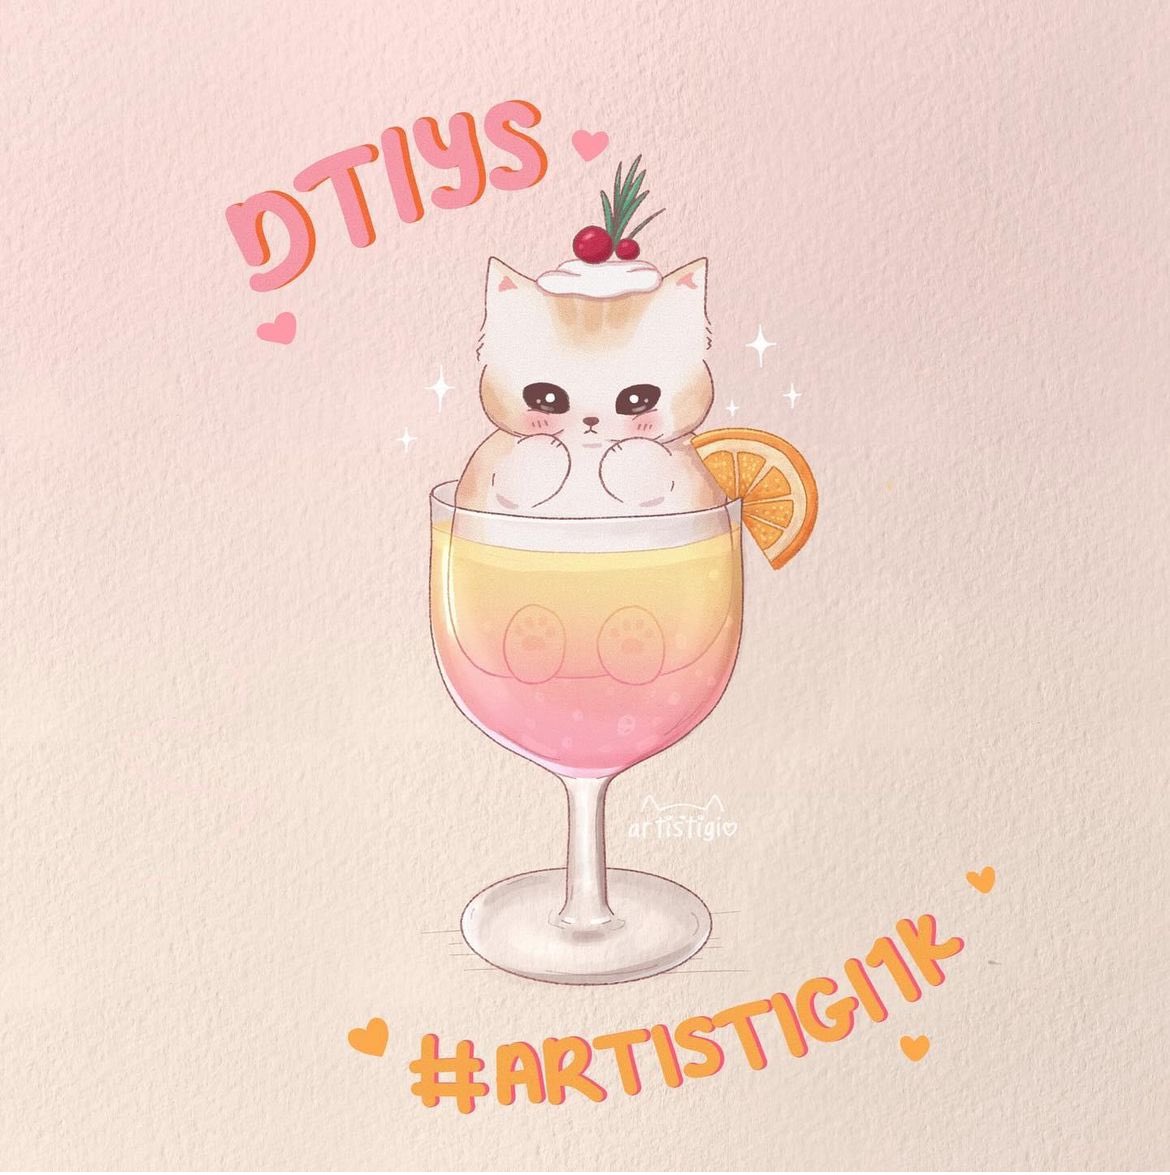 Do not disturb! 100 Ghosts: 97/100. This is my version of the cute #dtiys by @artistigi on IG. It was a perfect fit for the 100 Ghosts project! #100daydrawing2023